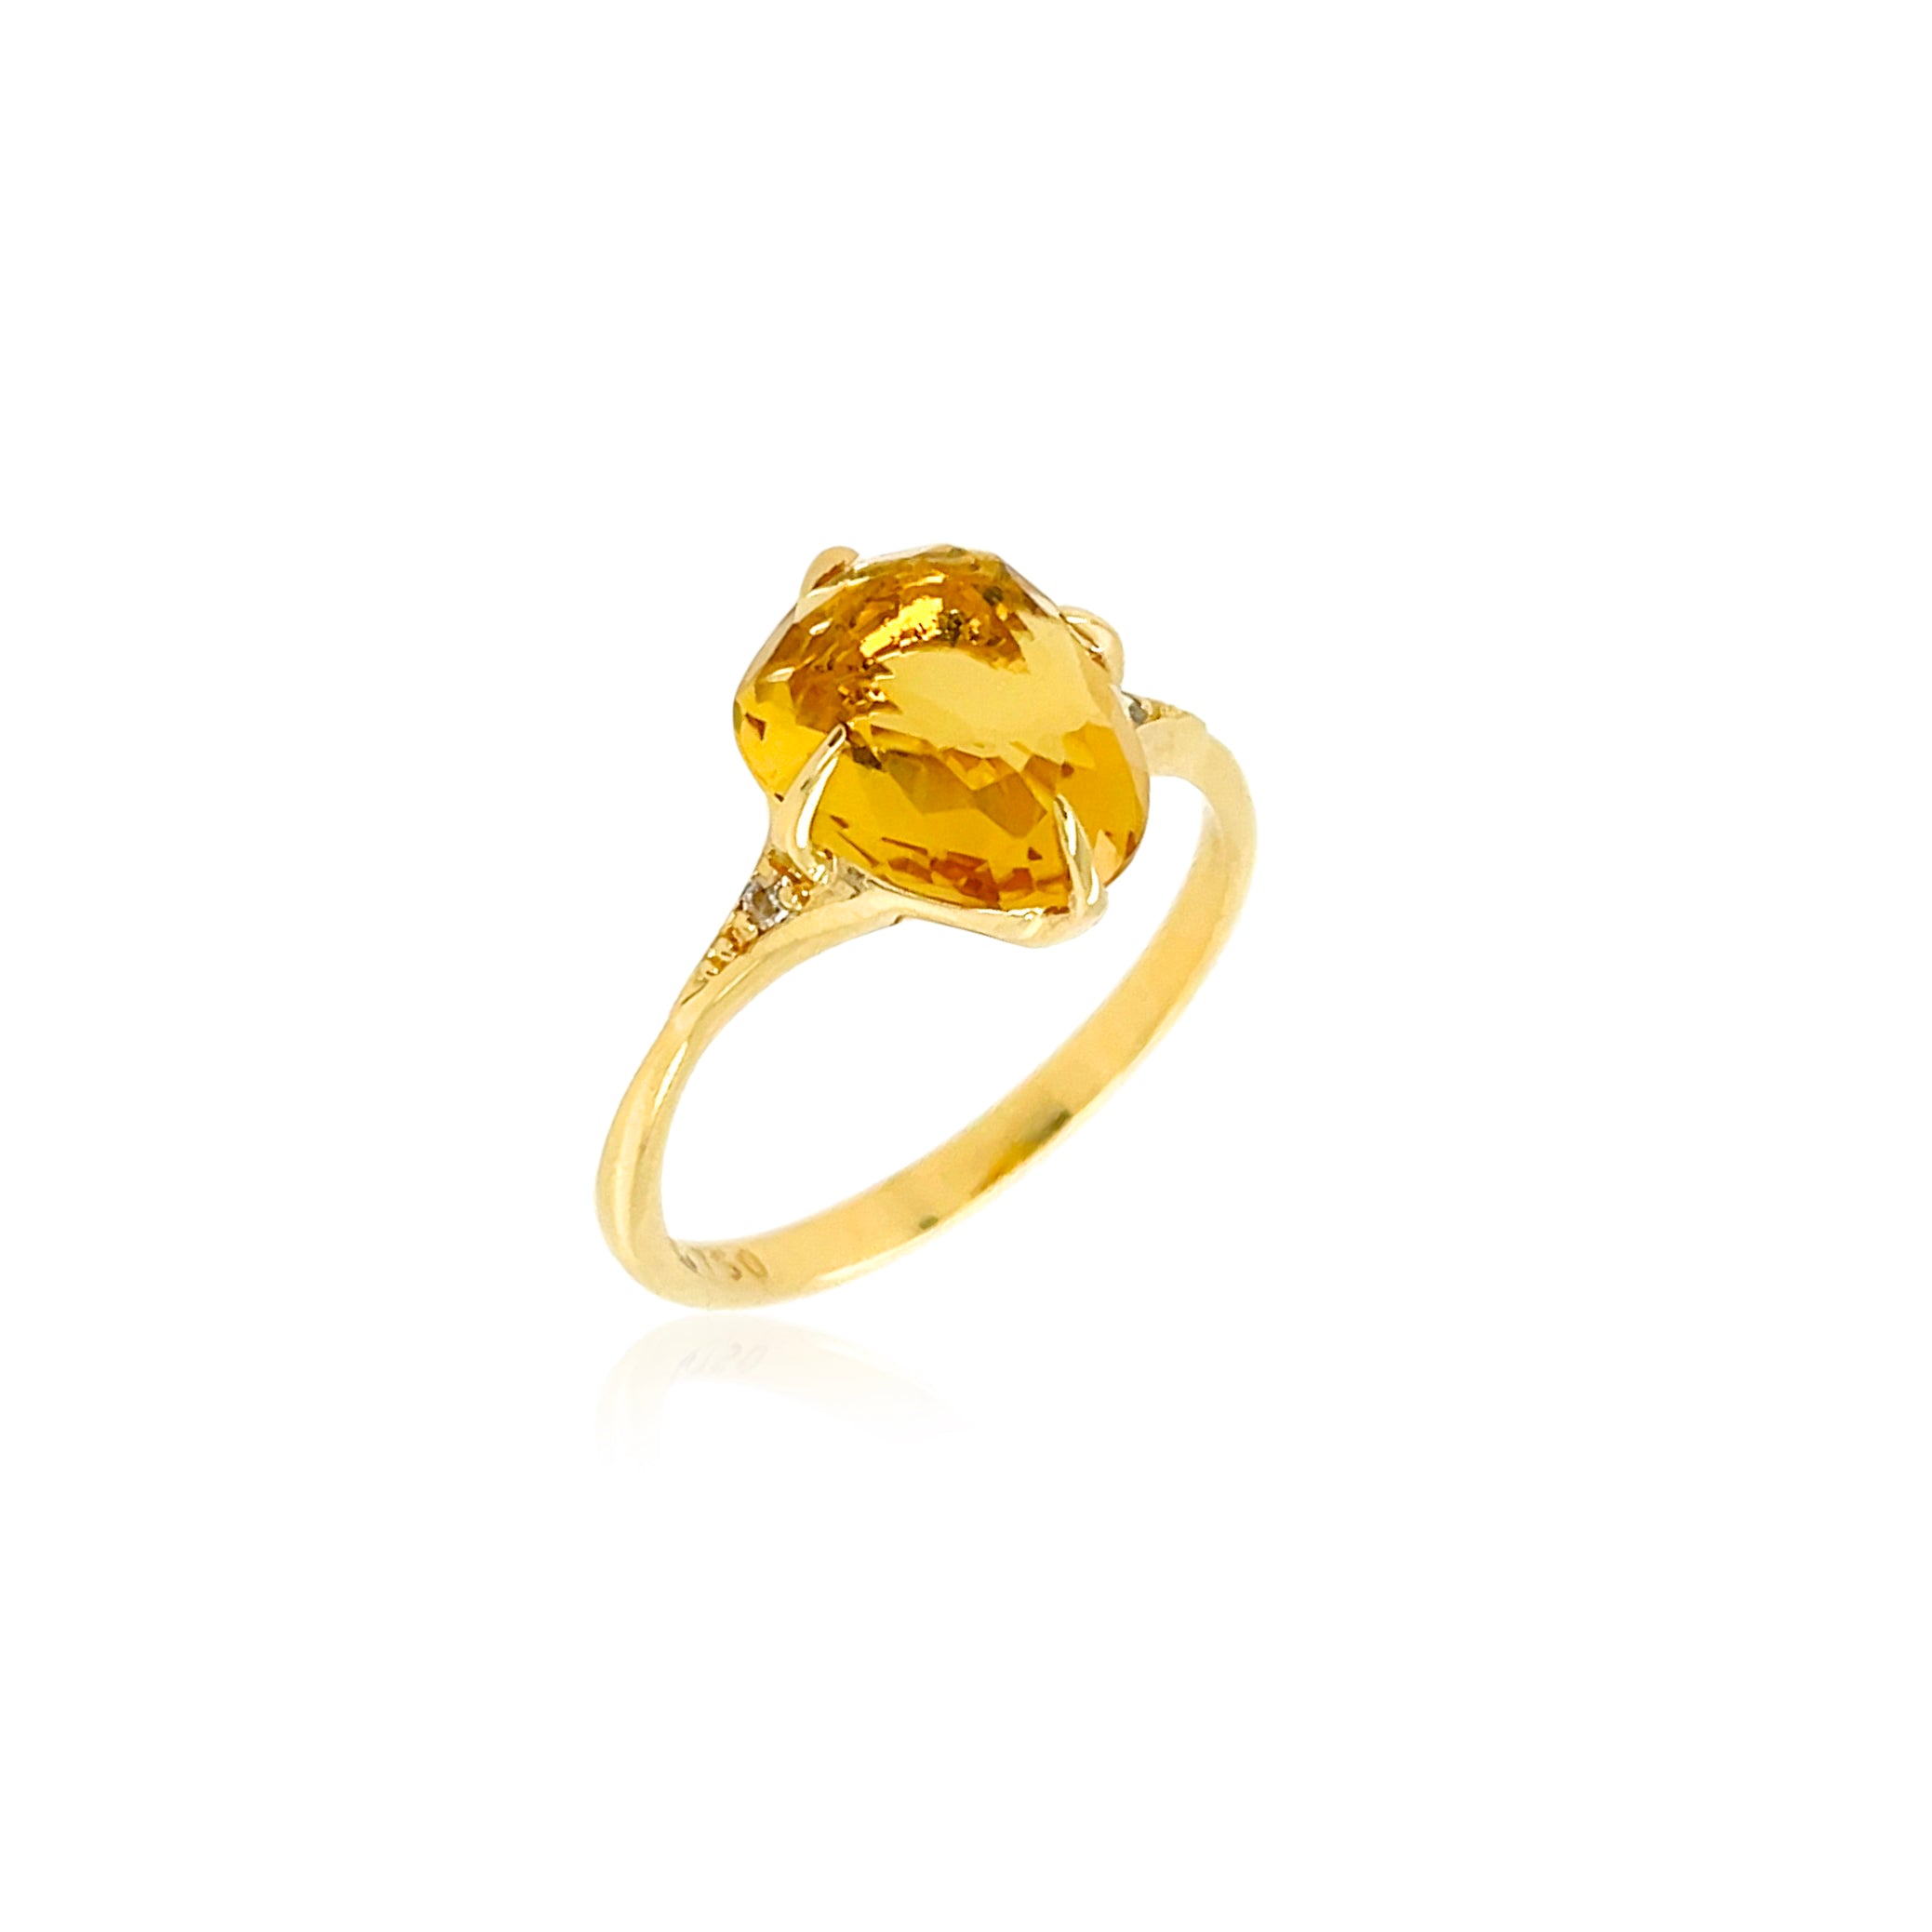 Sugar loaf collection made in Brazil  Tear shape faceted Citrine 8.40 cts  Round small diamonds 0.09 cts  Set in 18k yellow gold  Secure hinged system  11.50 mm.